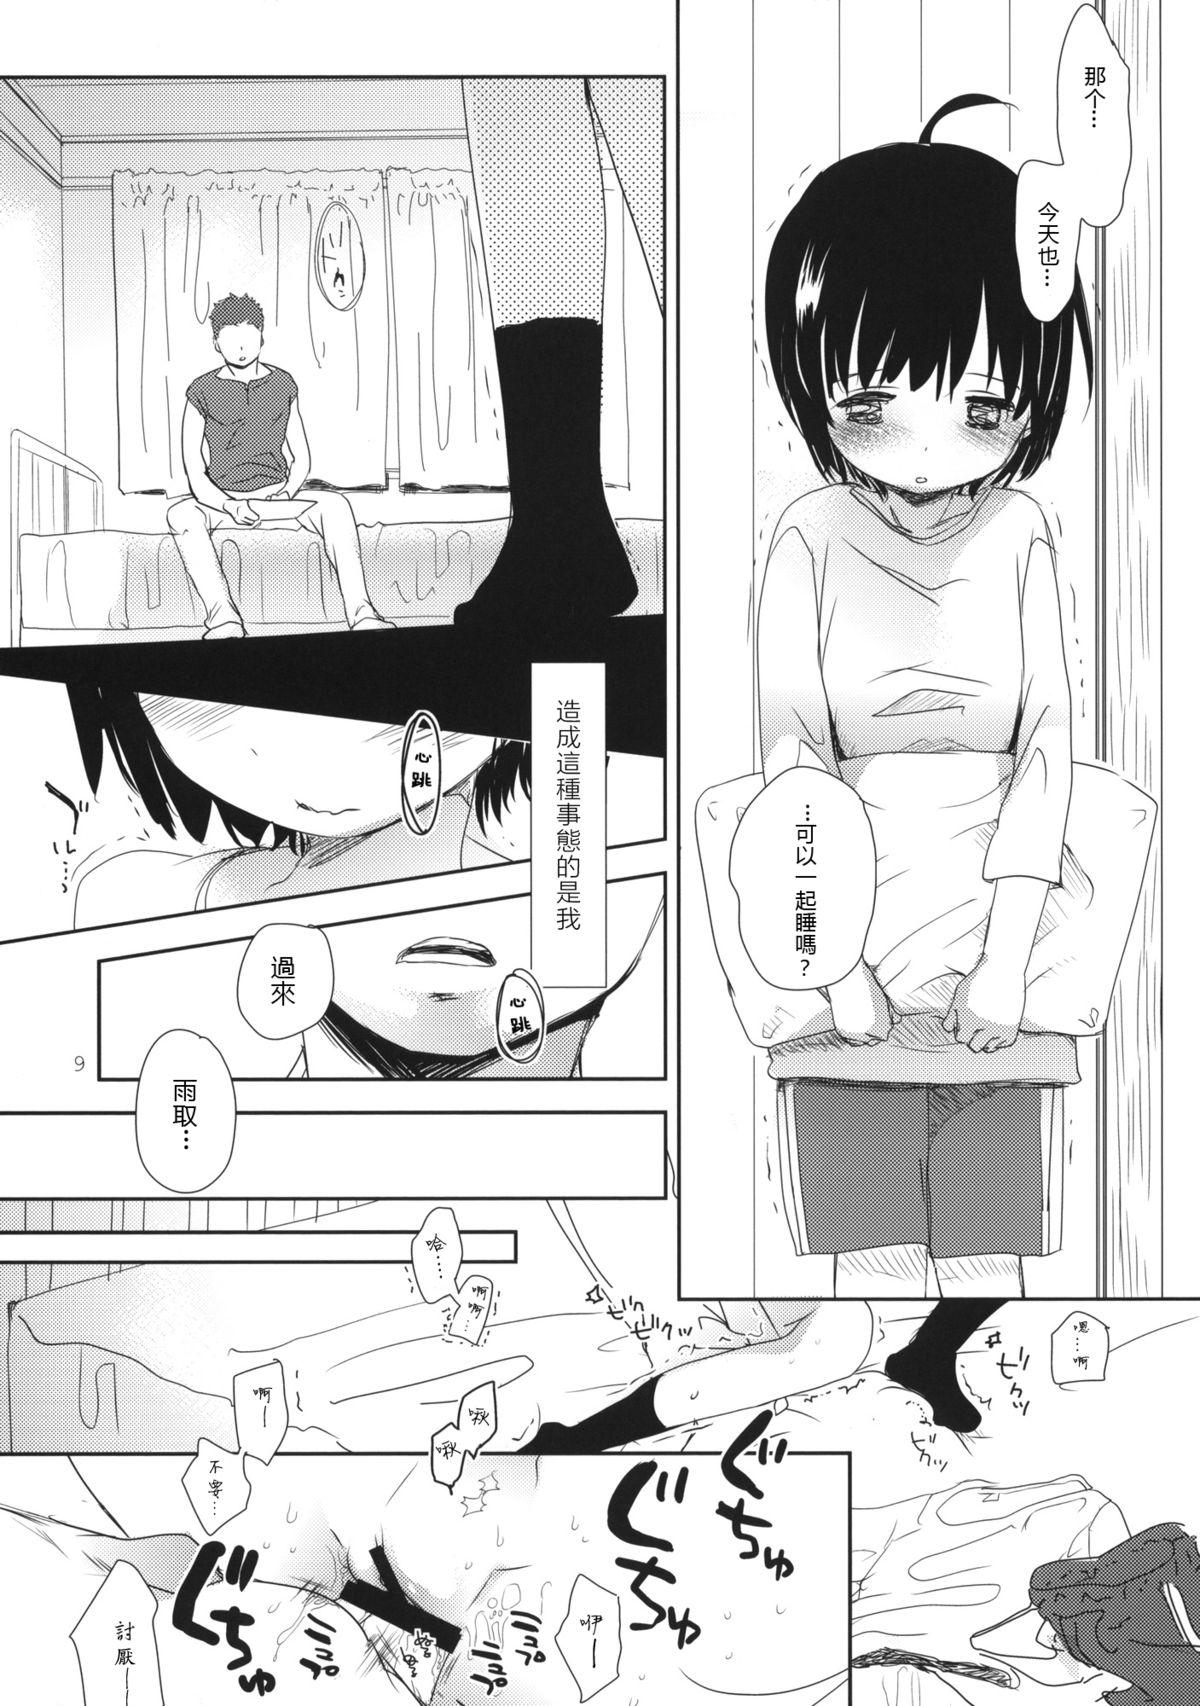 Petite Girl Porn DUMMY - World trigger Small - Page 9